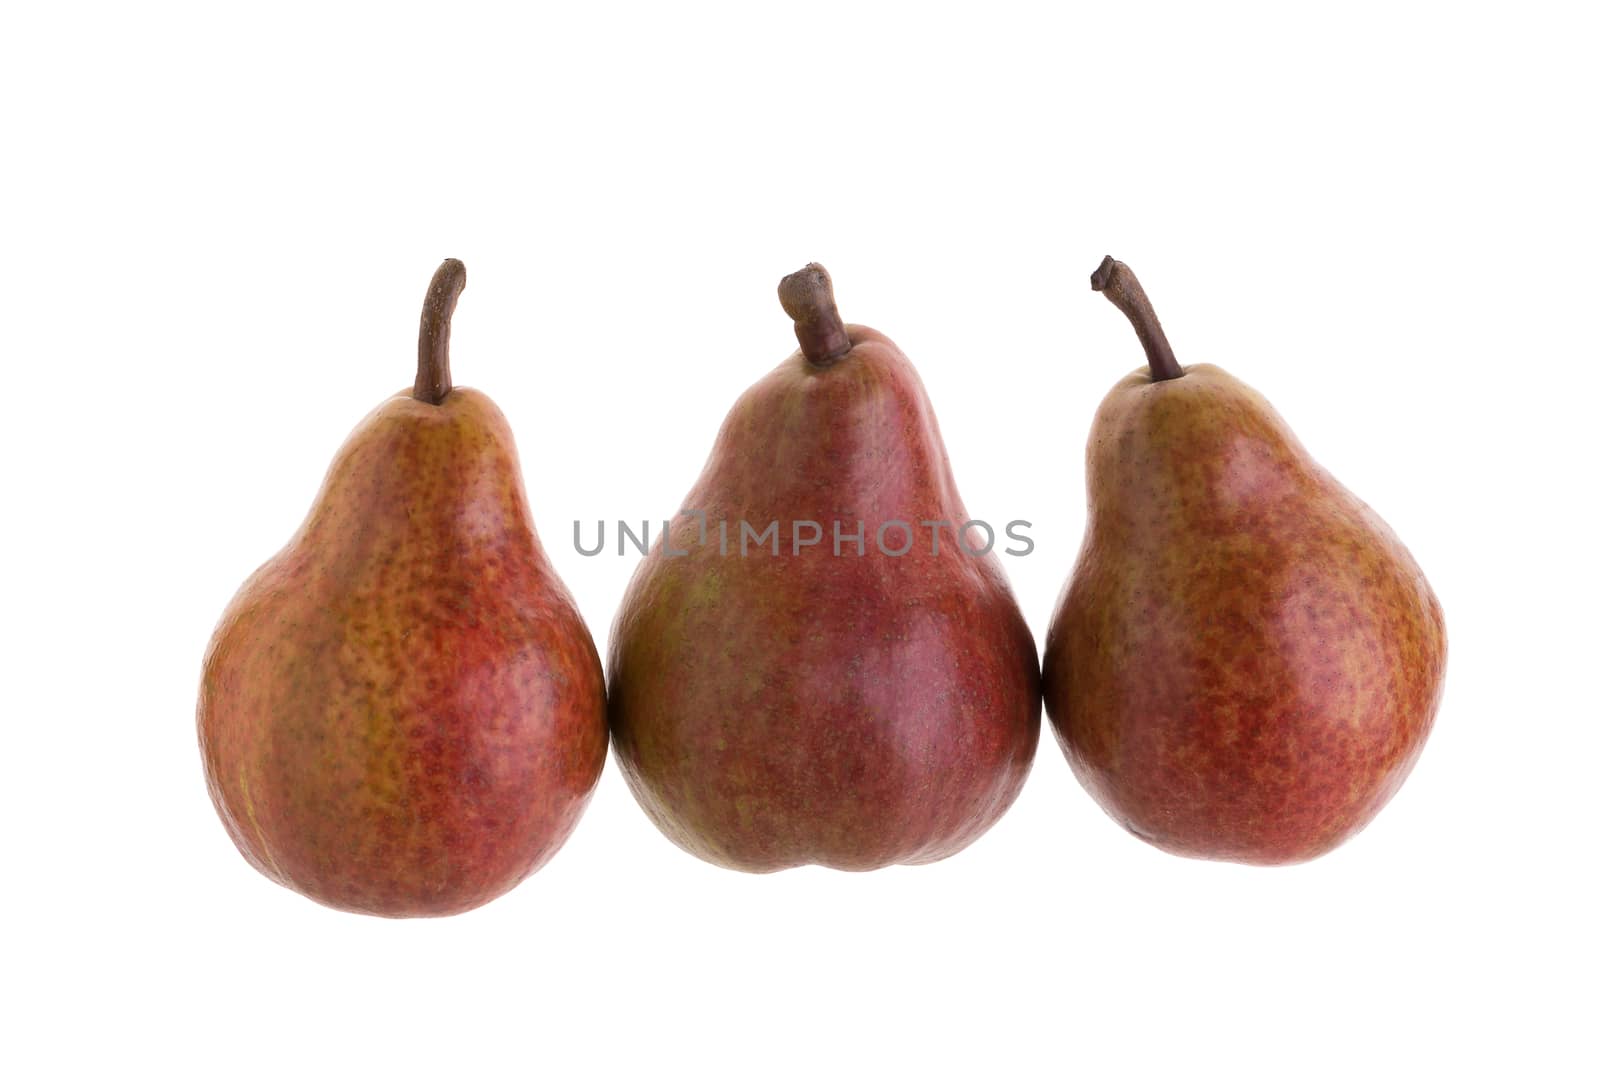 Ripe red pears isolated on a white background by kaiskynet